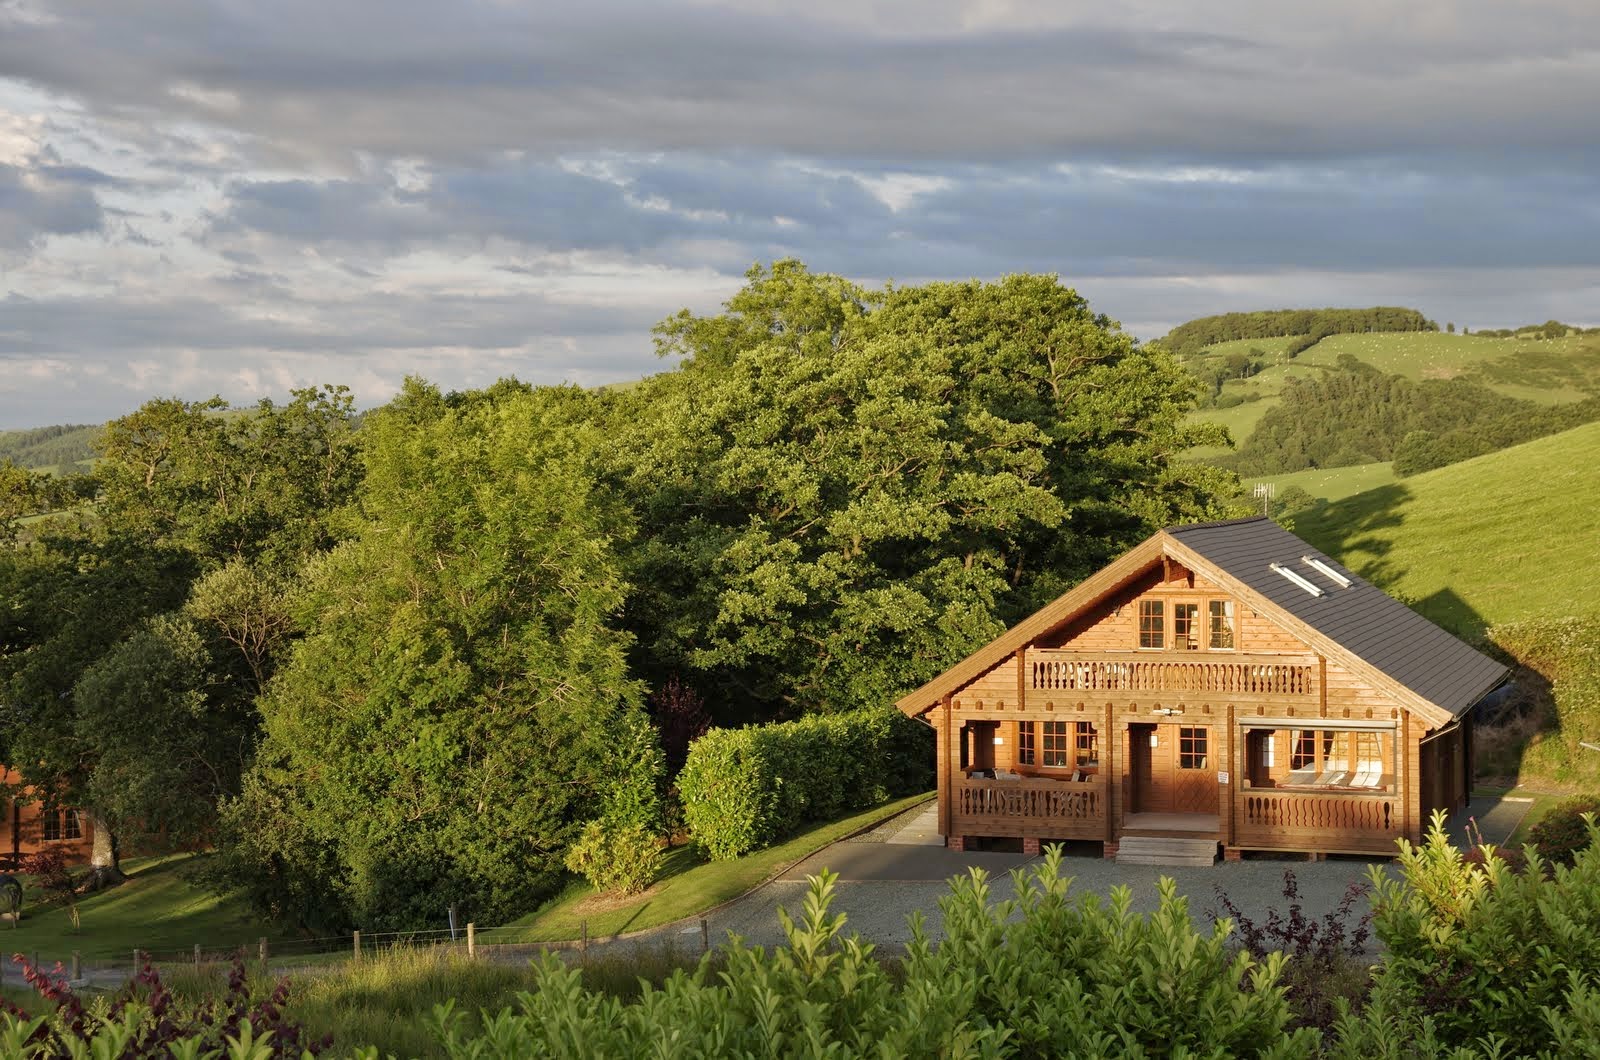 5* Luxury Lodges with Hot Tubs in Wales Luxury Lodges Wales